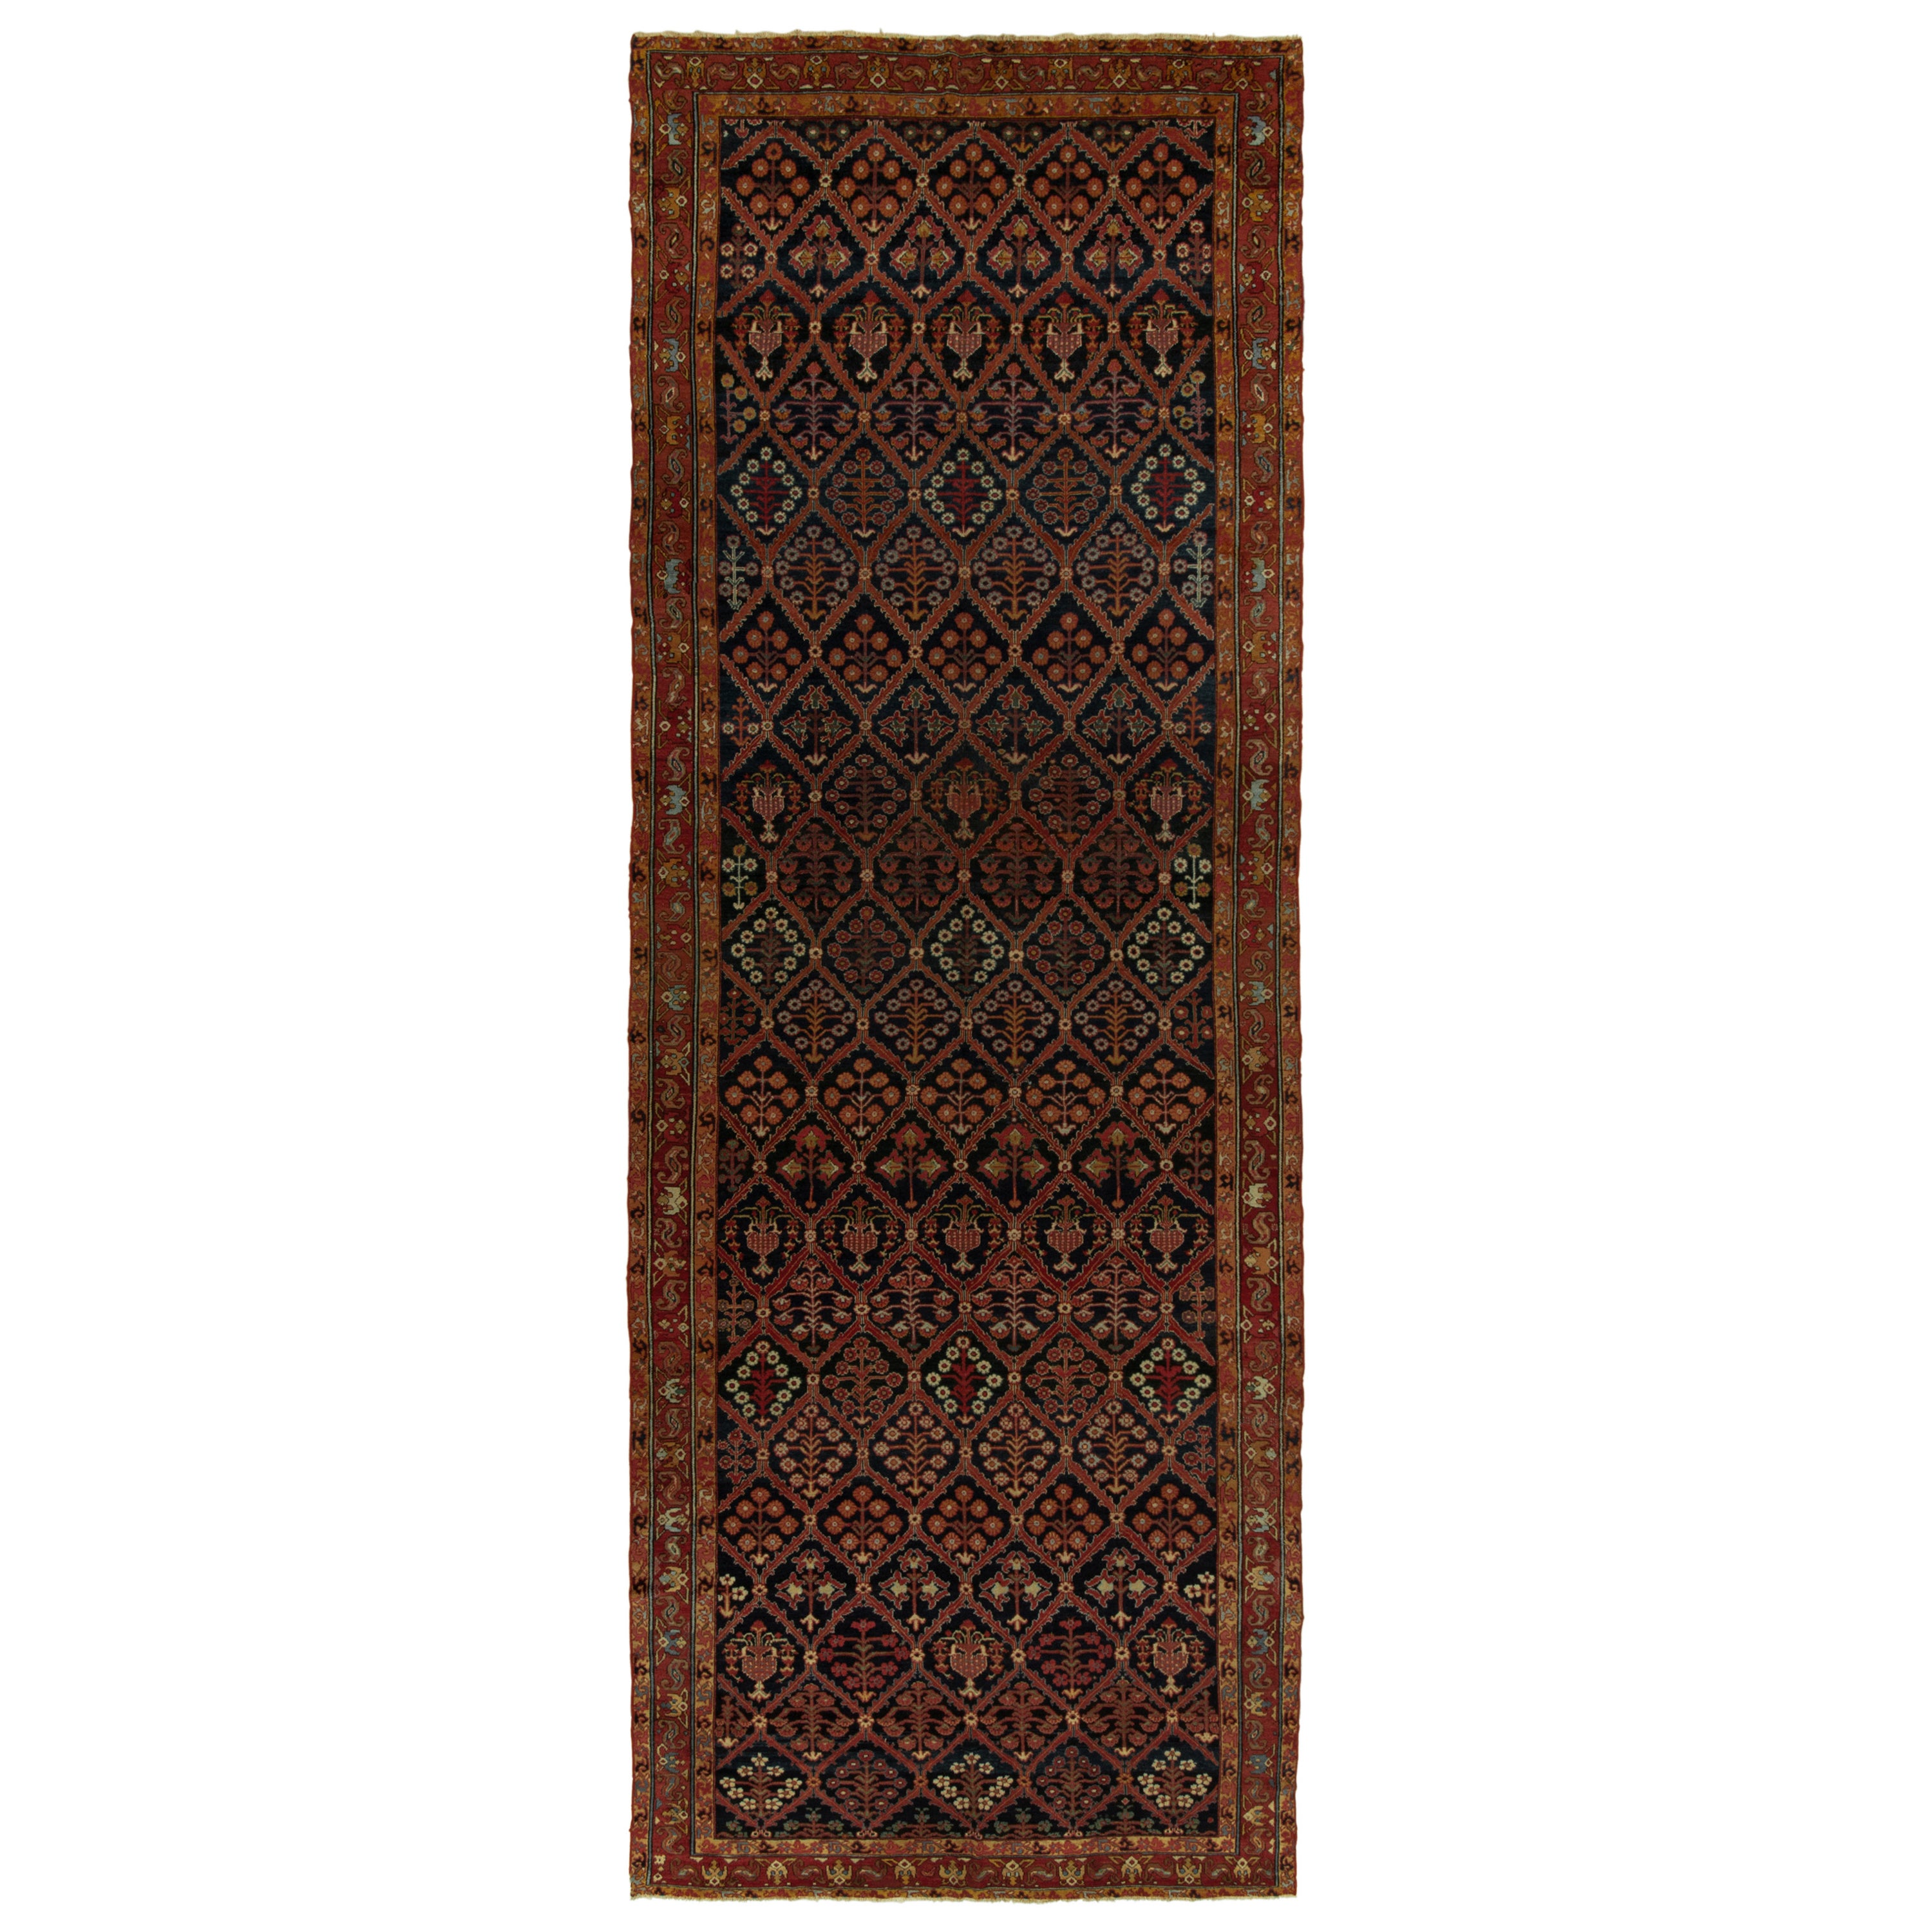 Rare Antique Persian Joshaghan rug in Red, Black & Golden-Brown Floral Patterns For Sale